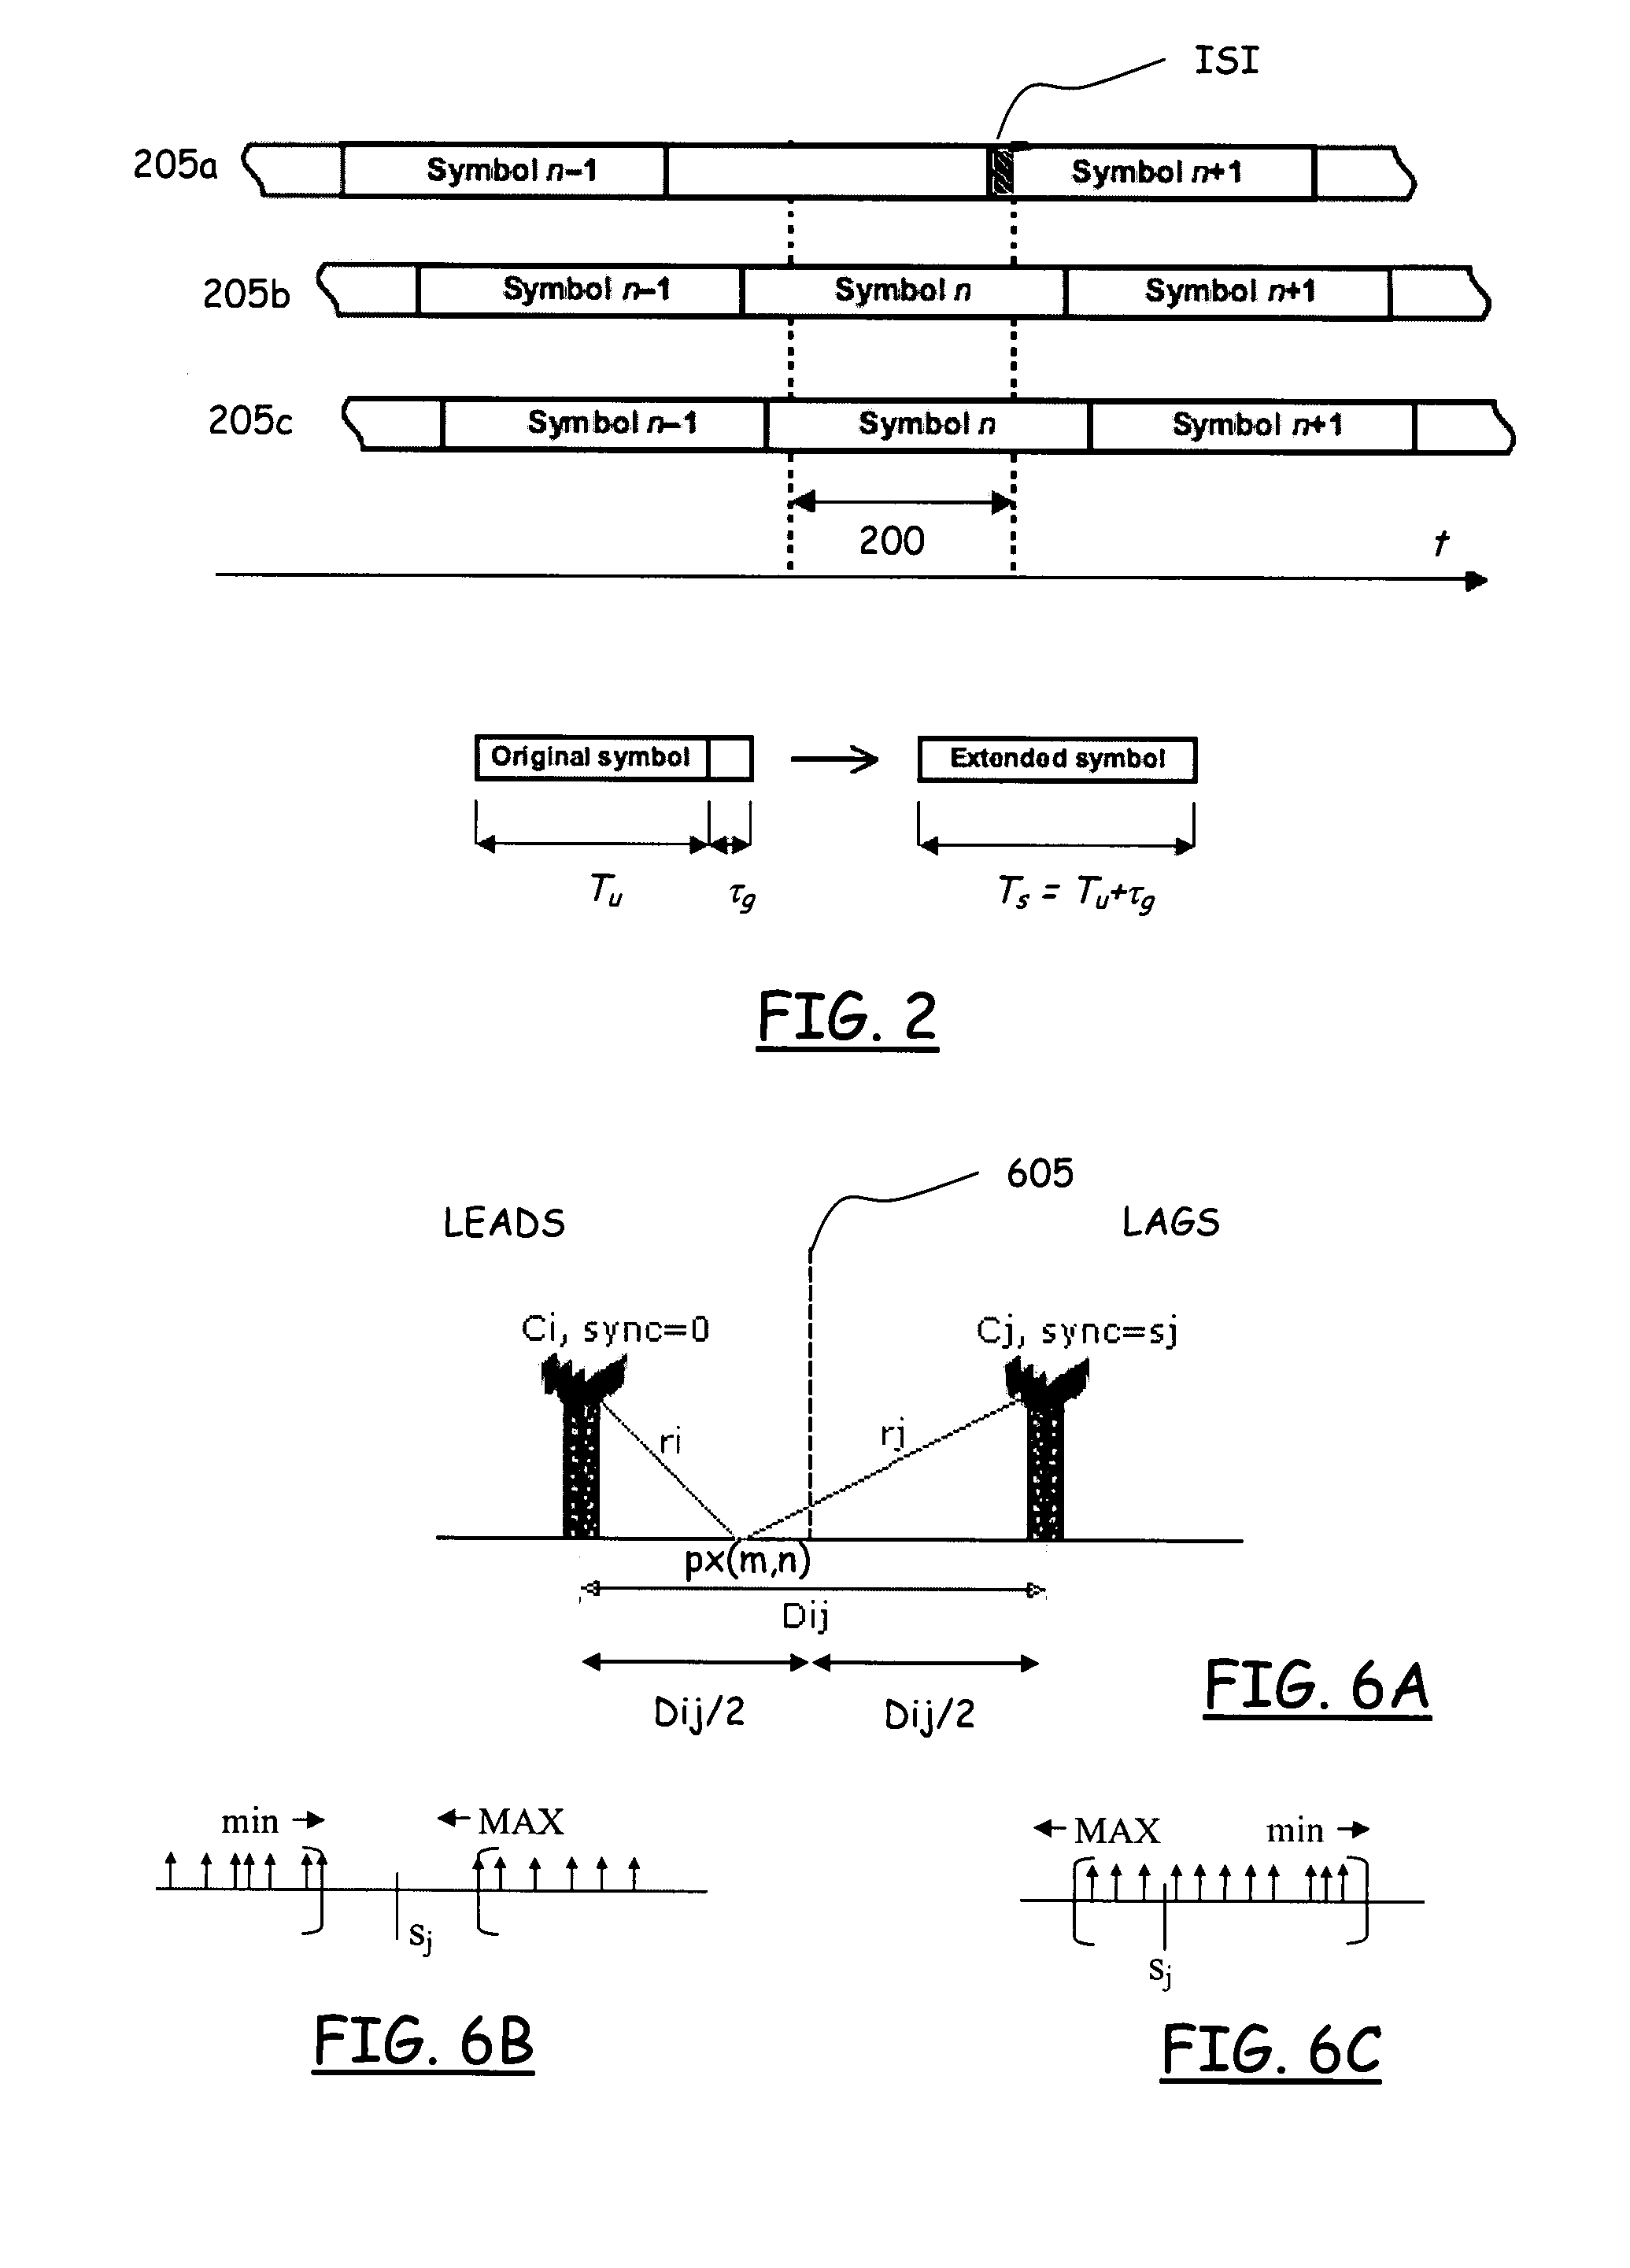 Method of adjusting timing transmission parameters in a single frequency network